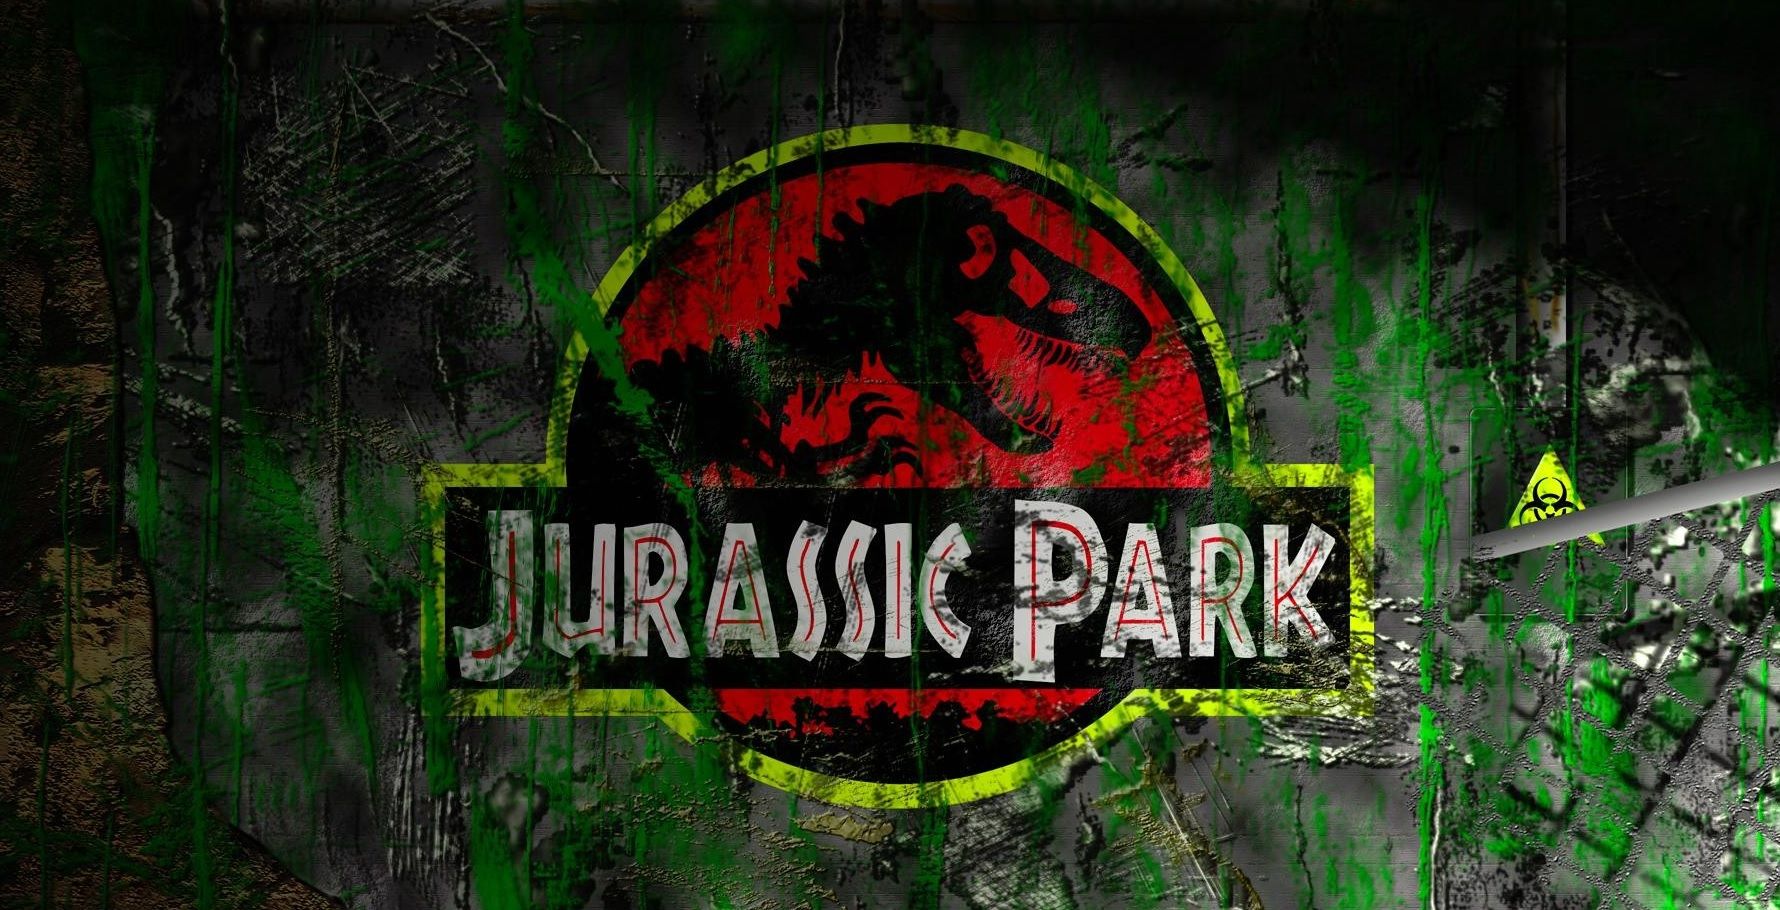 10 Most Memorable Quotes From The Jurassic Park Franchise